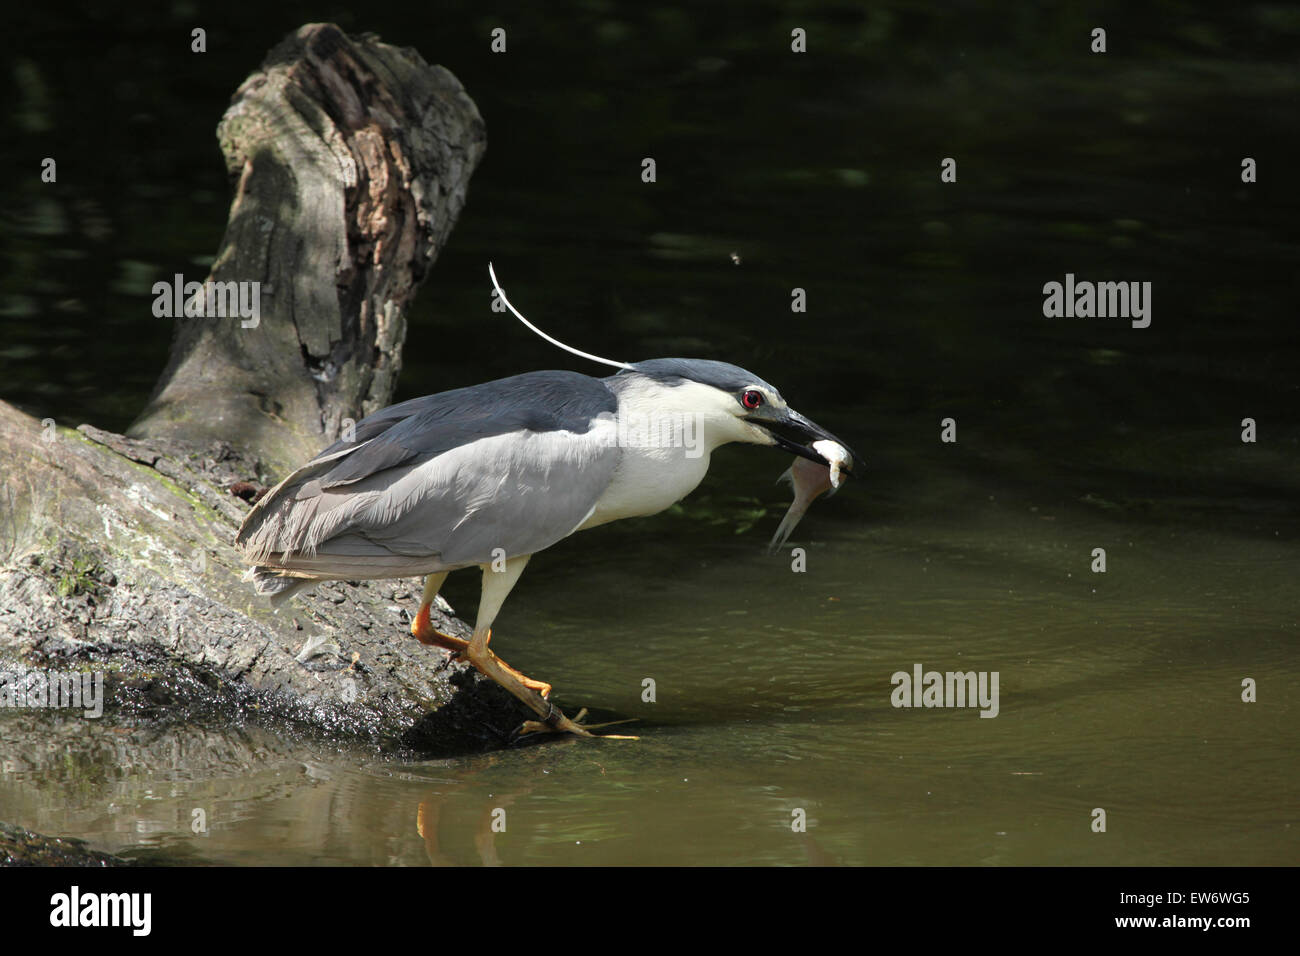 Black-crowned night heron (Nycticorax nycticorax), also known as the night heron catching fish at Prague Zoo, Czech Republic. Stock Photo